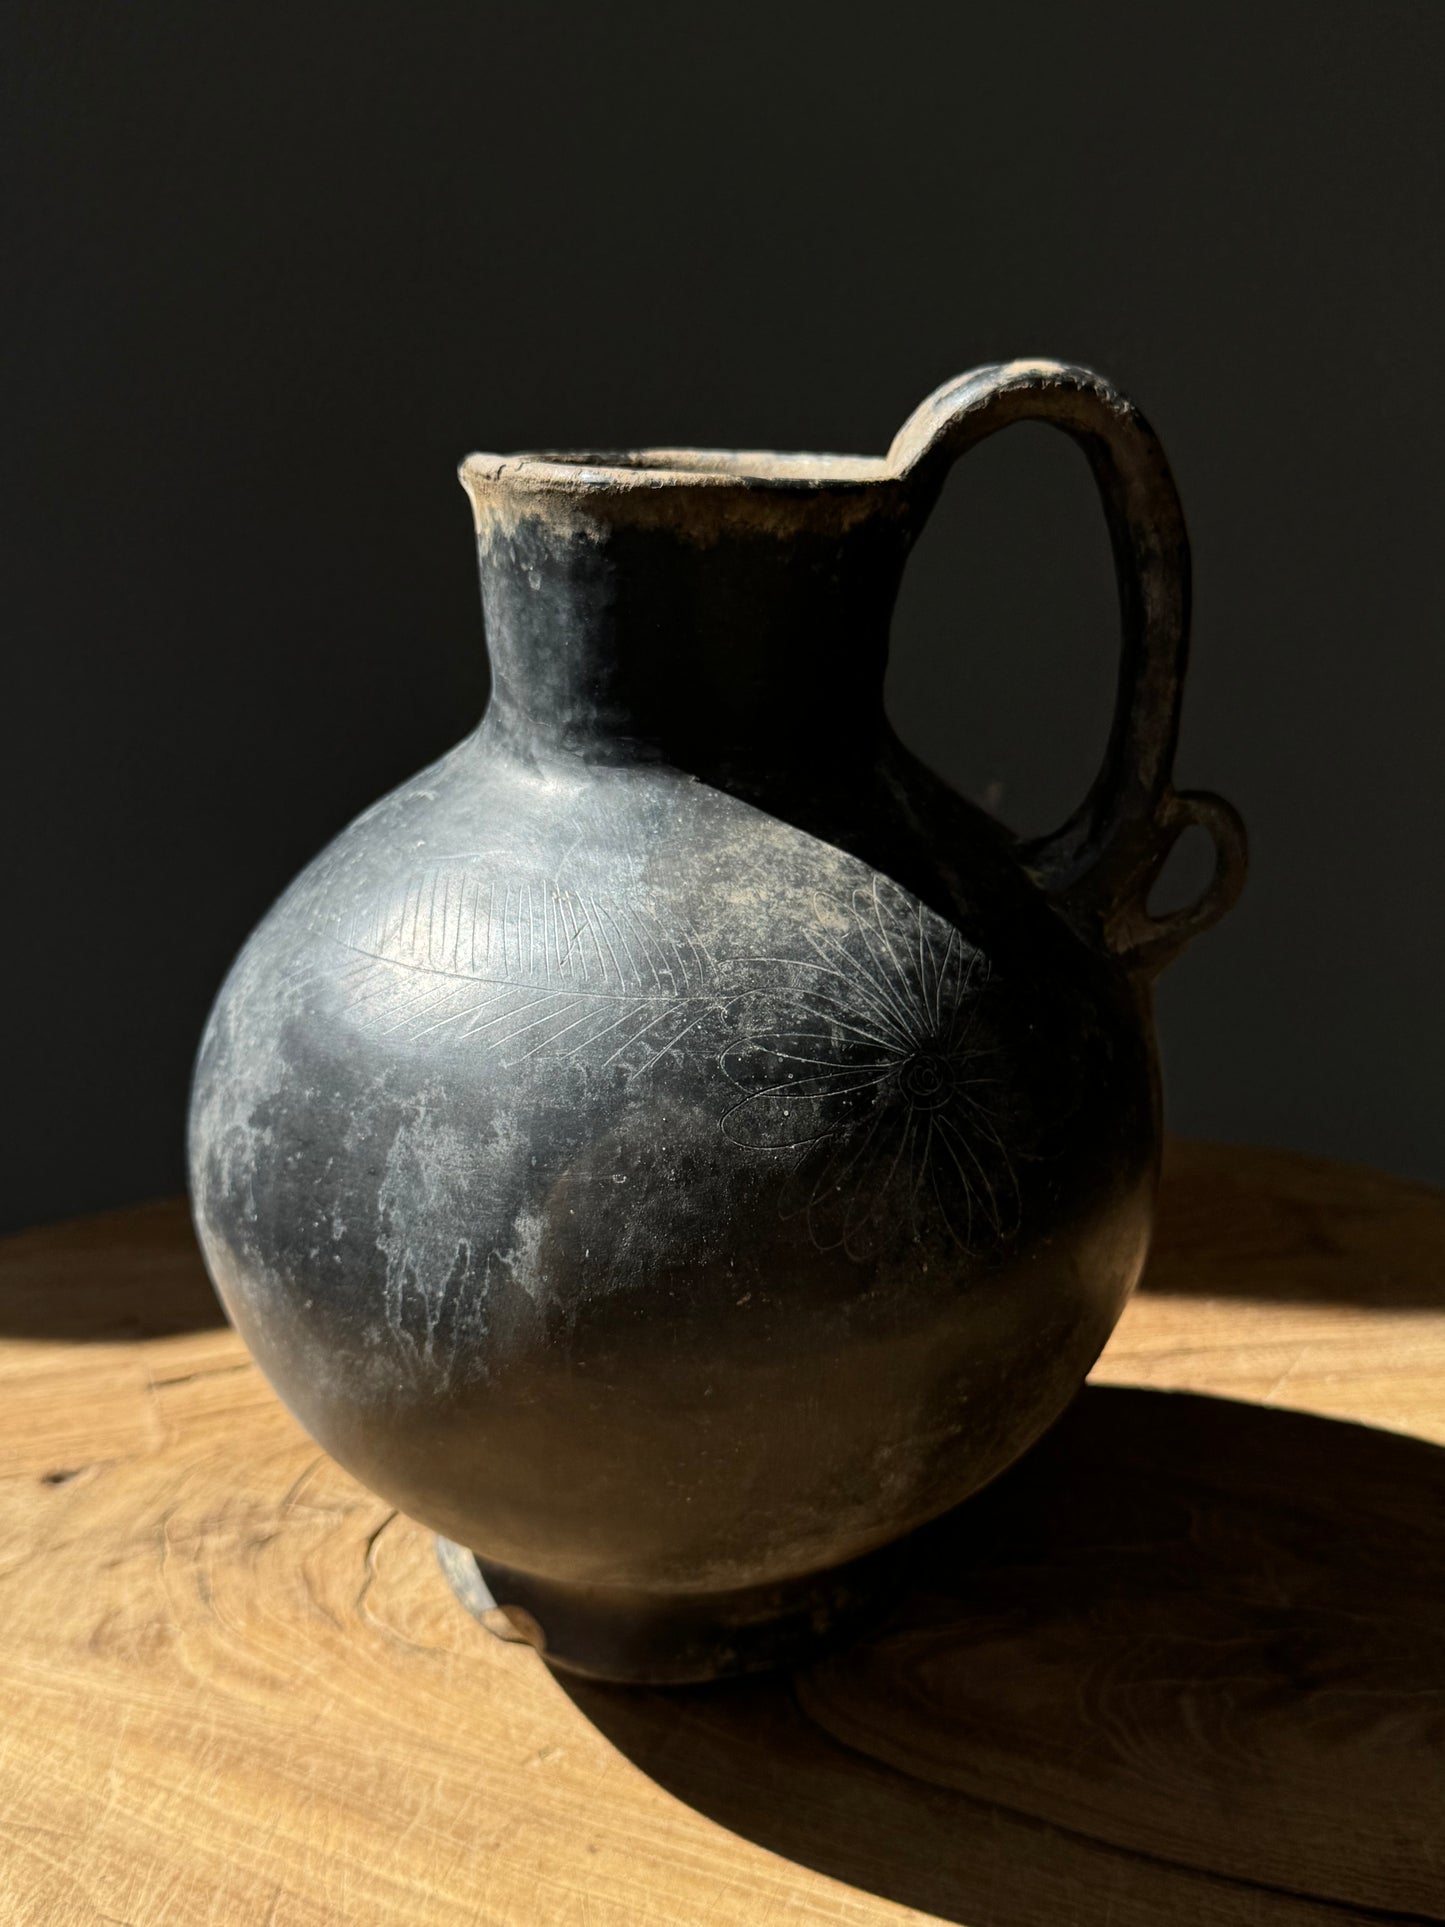 Black Clay Ceramic Pitcher With Flower Engraving From Coyotepec, Oaxaca, Circa 1940’s